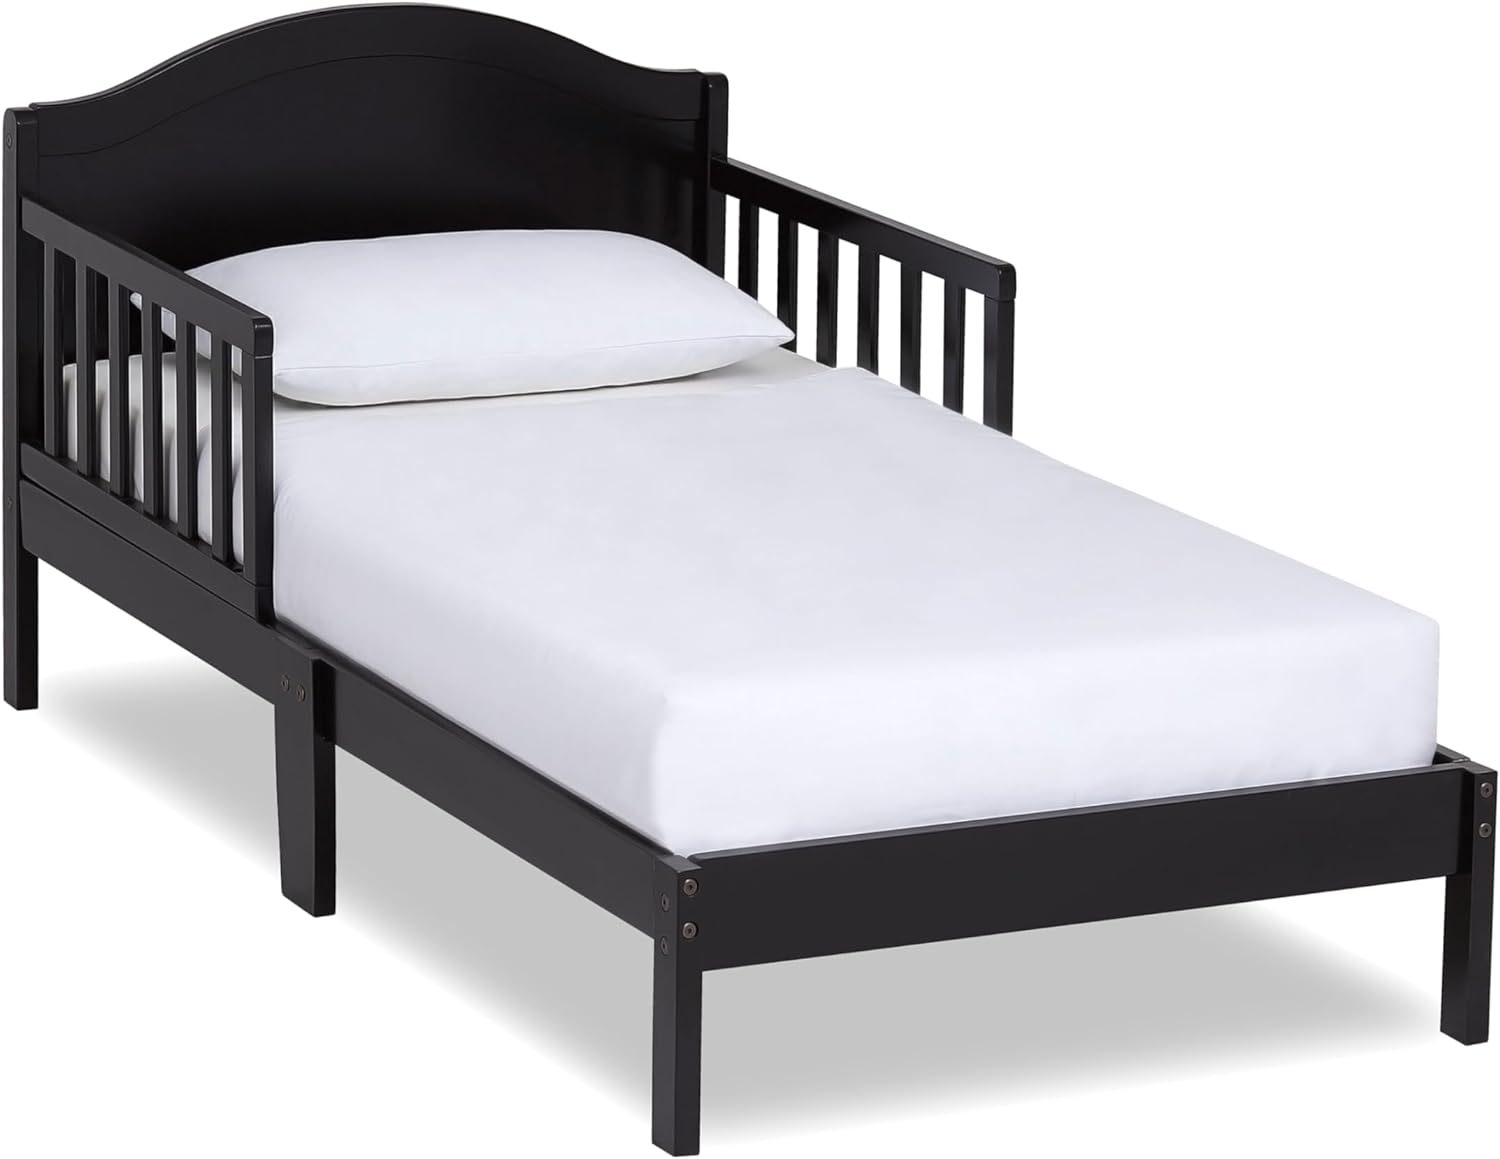 53"L Dream On Me Sydney Toddler Bed (Black) $56 + Free Shipping